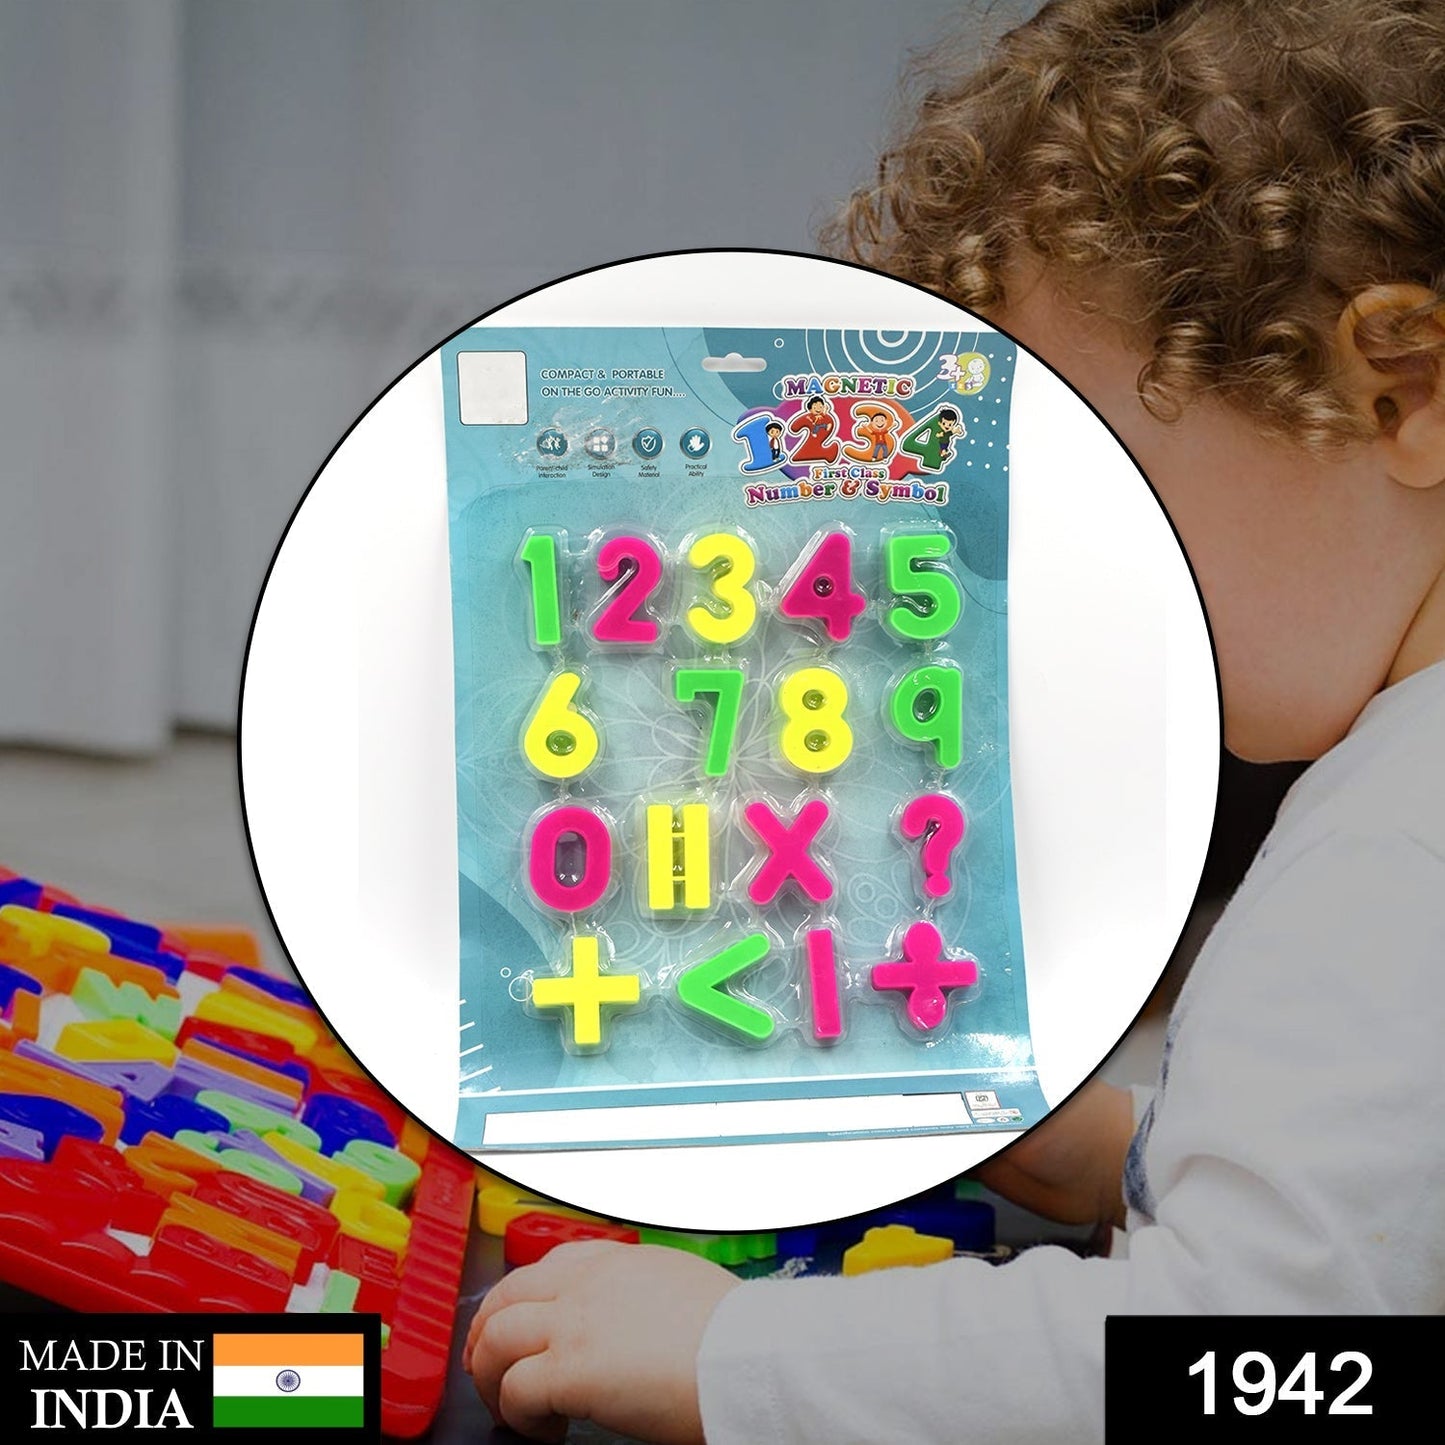 1942 AT42 Magnetic Number Symbol Baby Toy and game for kids and babies for playing and enjoying purposes. DeoDap